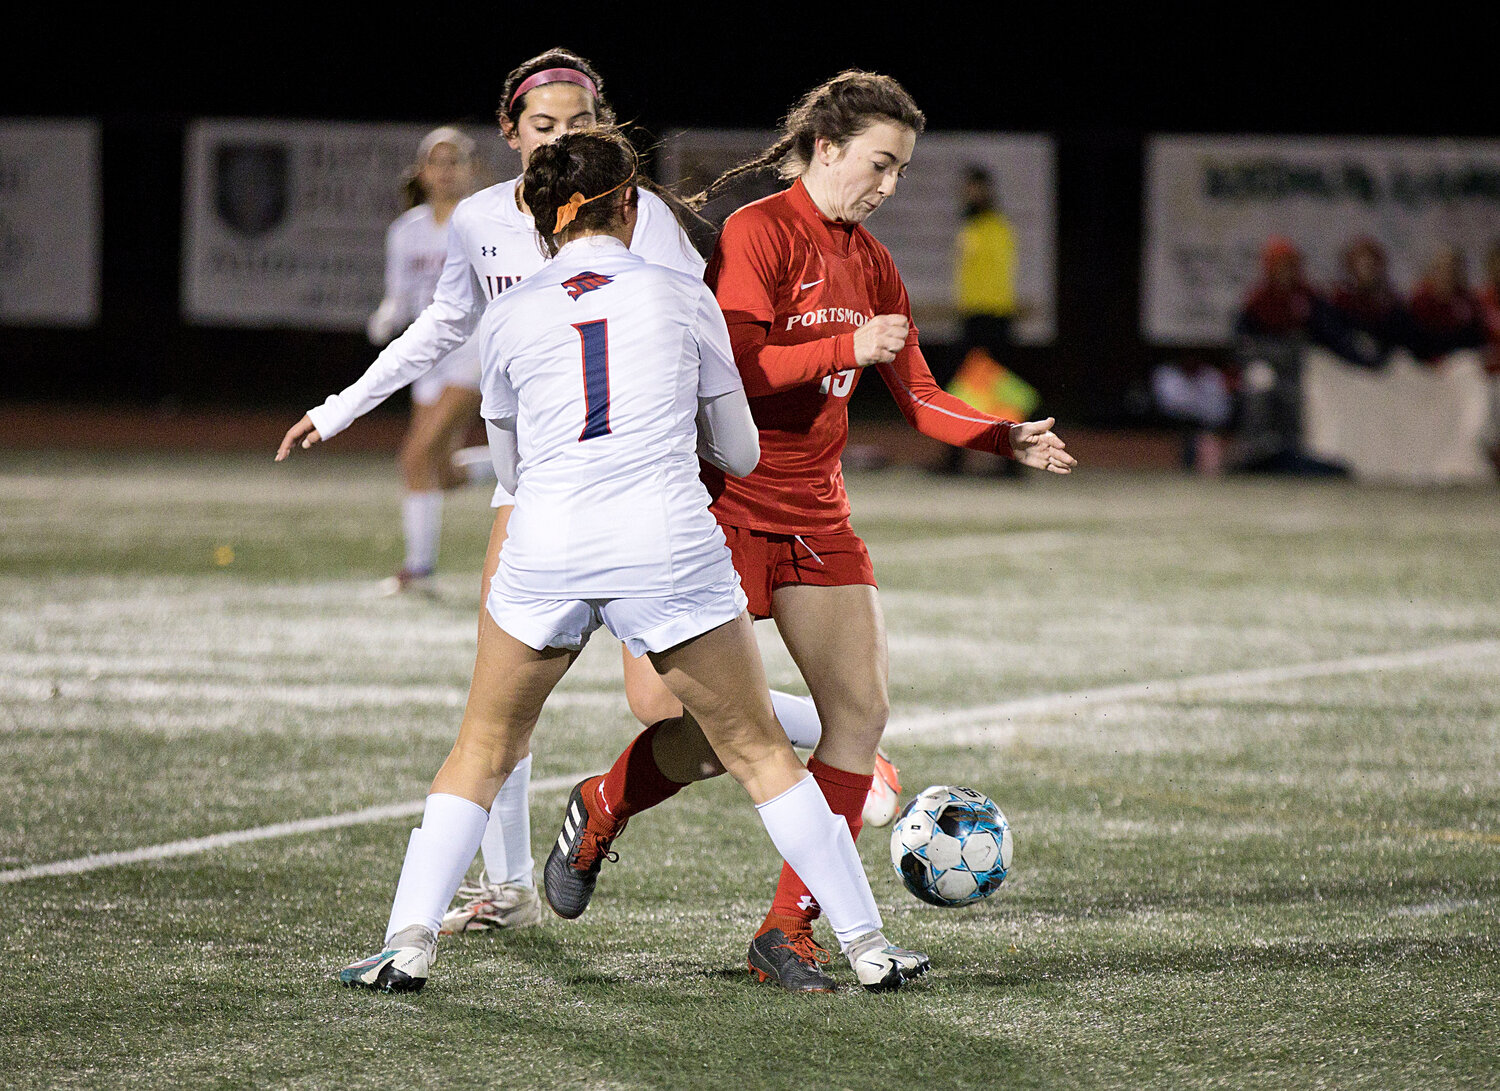 Claire Hook splits a pair of Lincoln opponents to advance the ball.